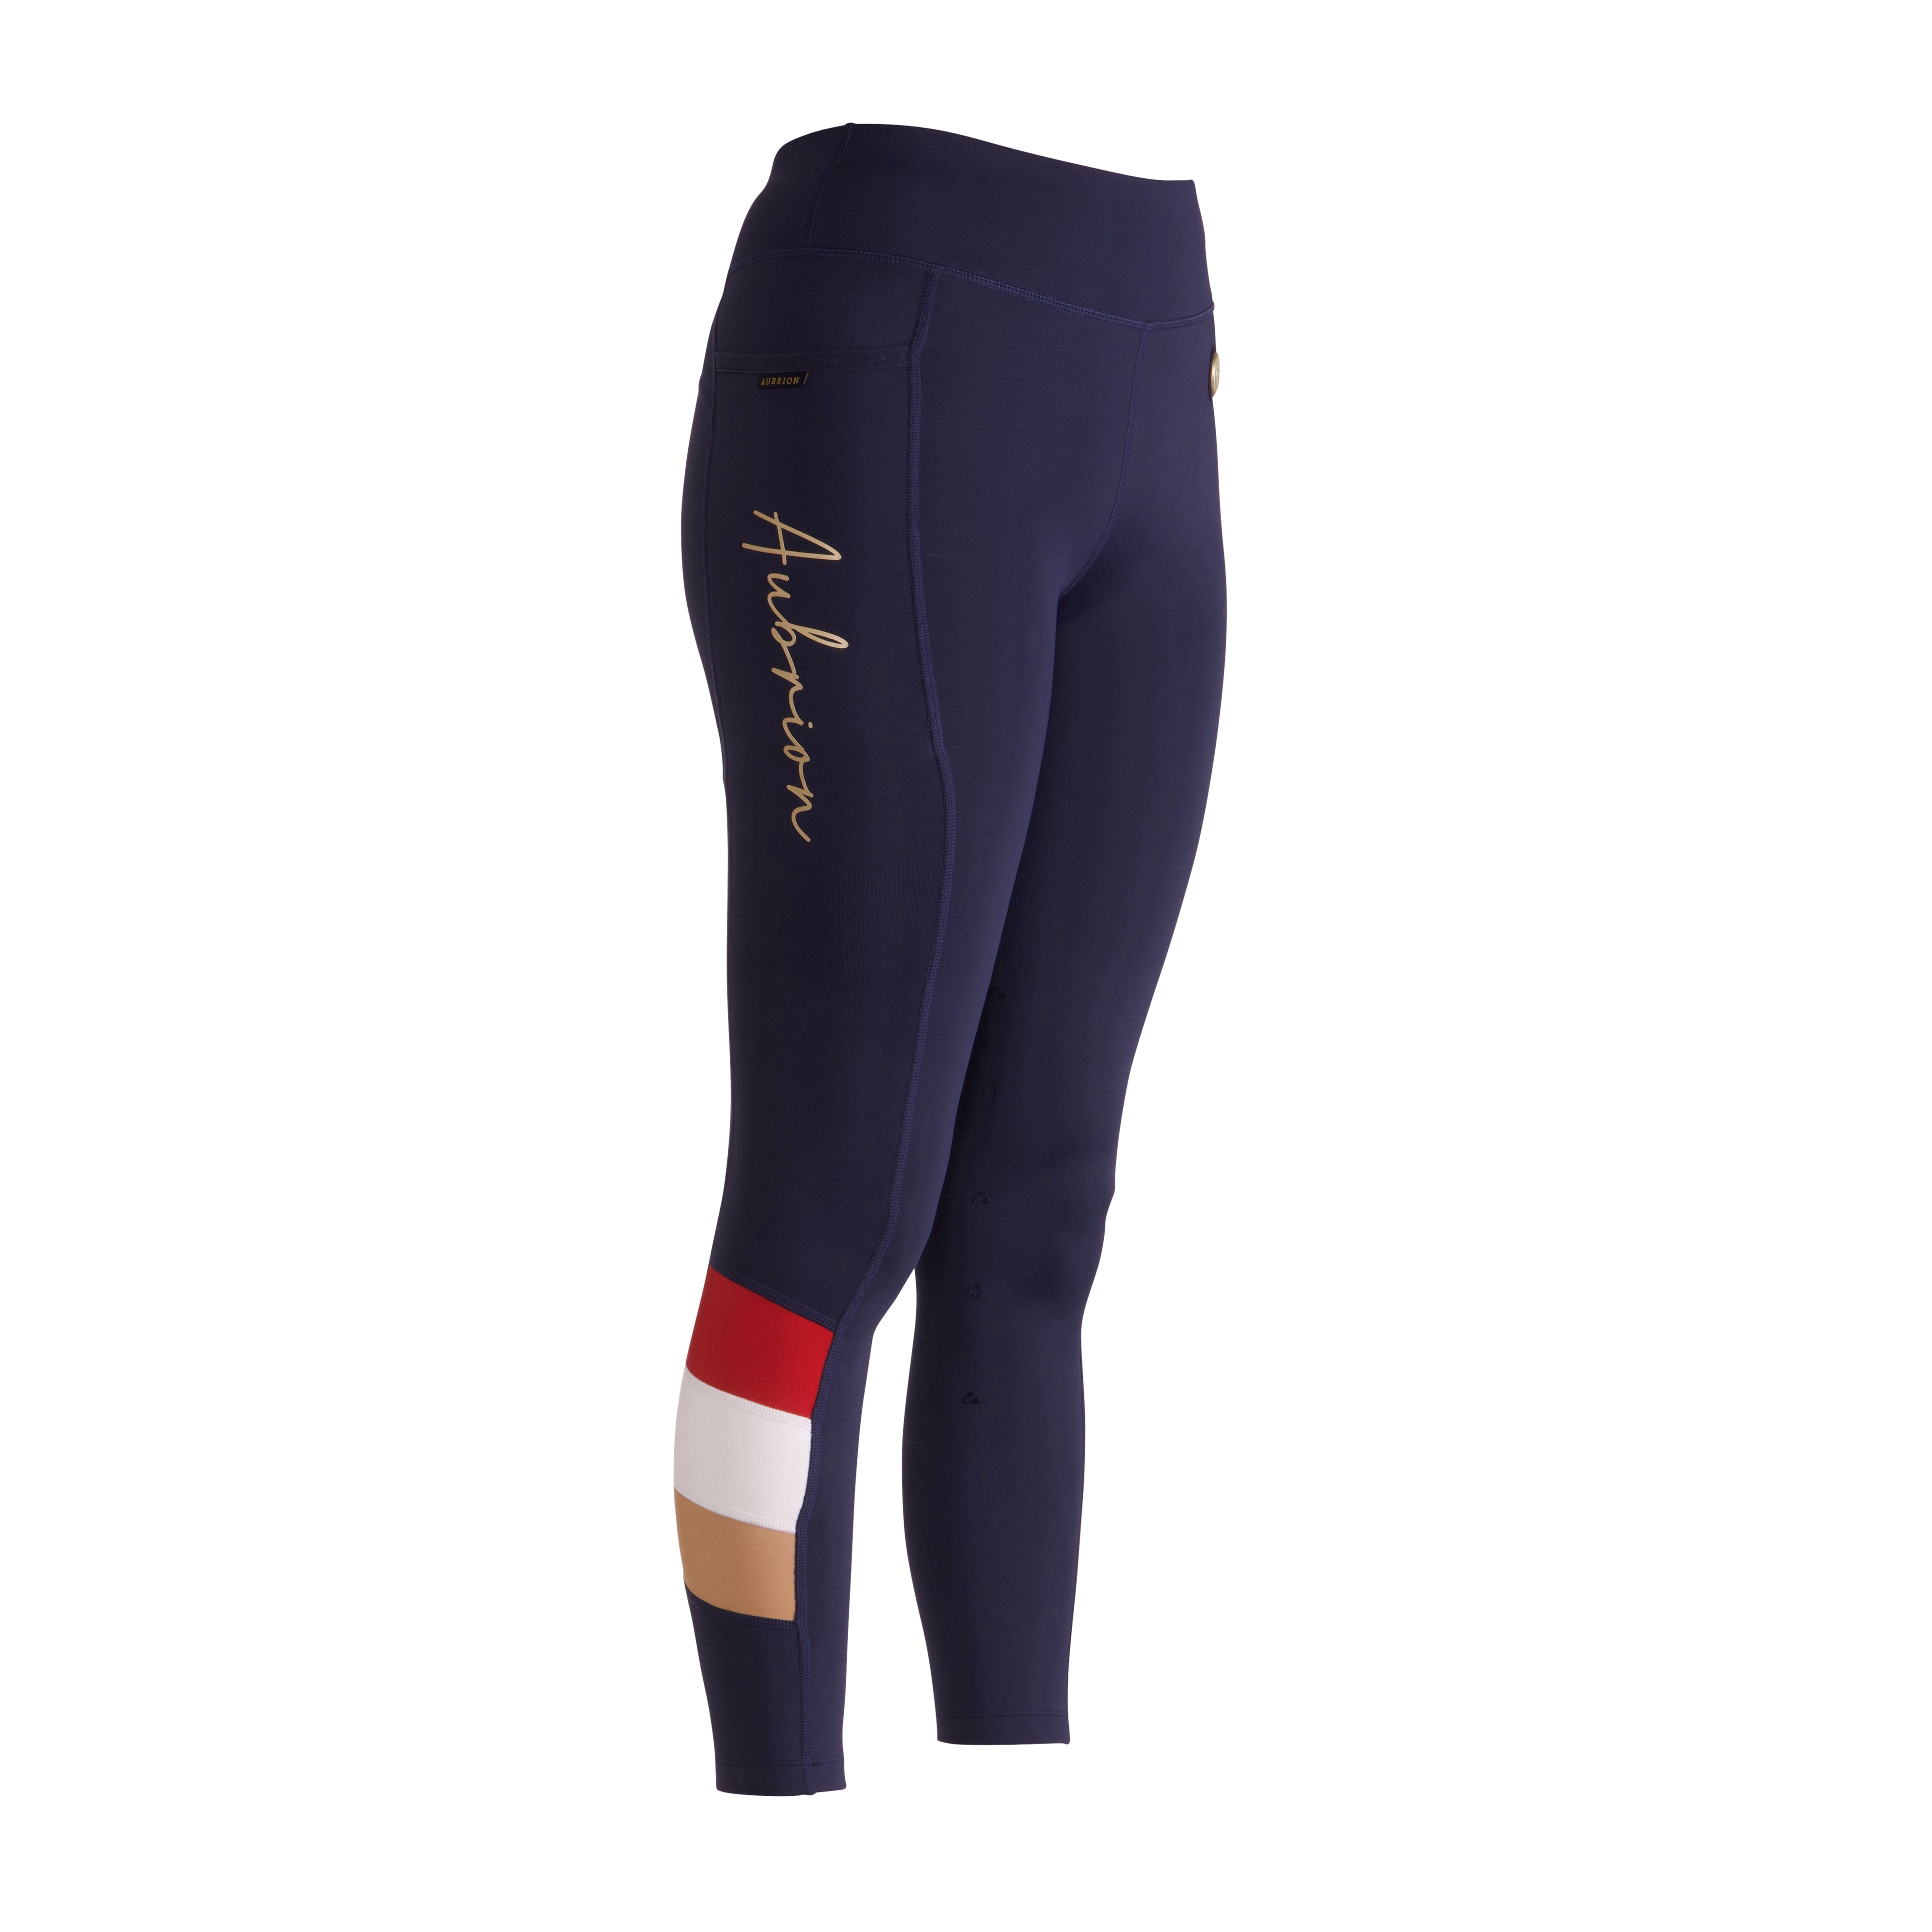 Shires Ladies Aubrion Team Shield Riding Tights